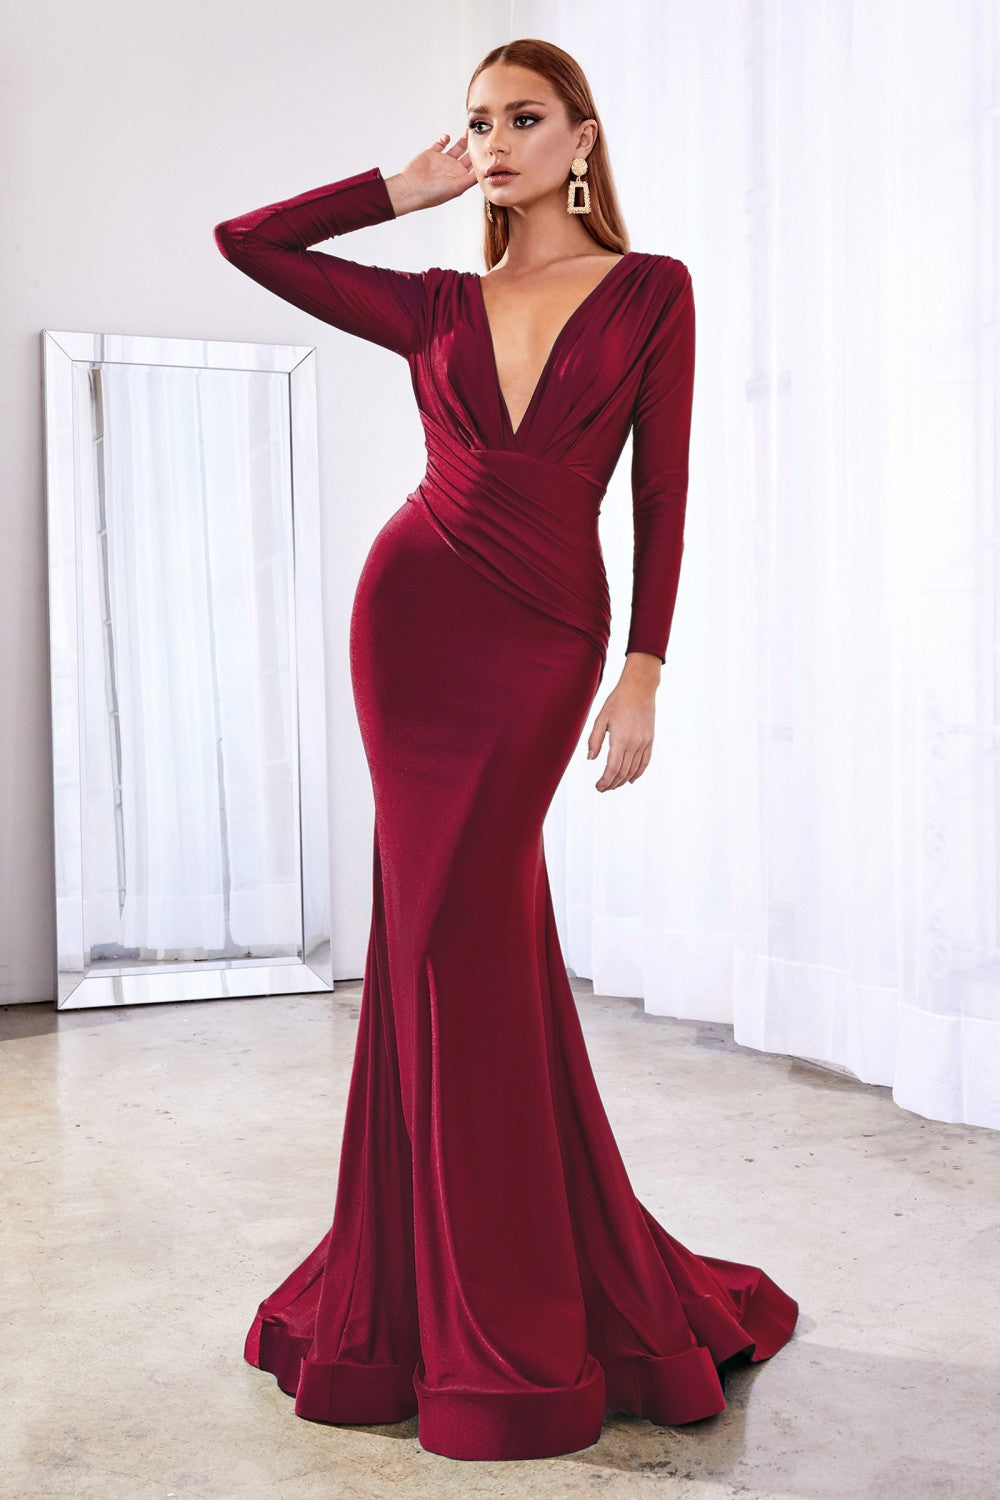 Hayley Long Sleeve Sexy Fitted Gown Bridesmaid Dress 740168AR-Burgundy SAMPLE IN STORE